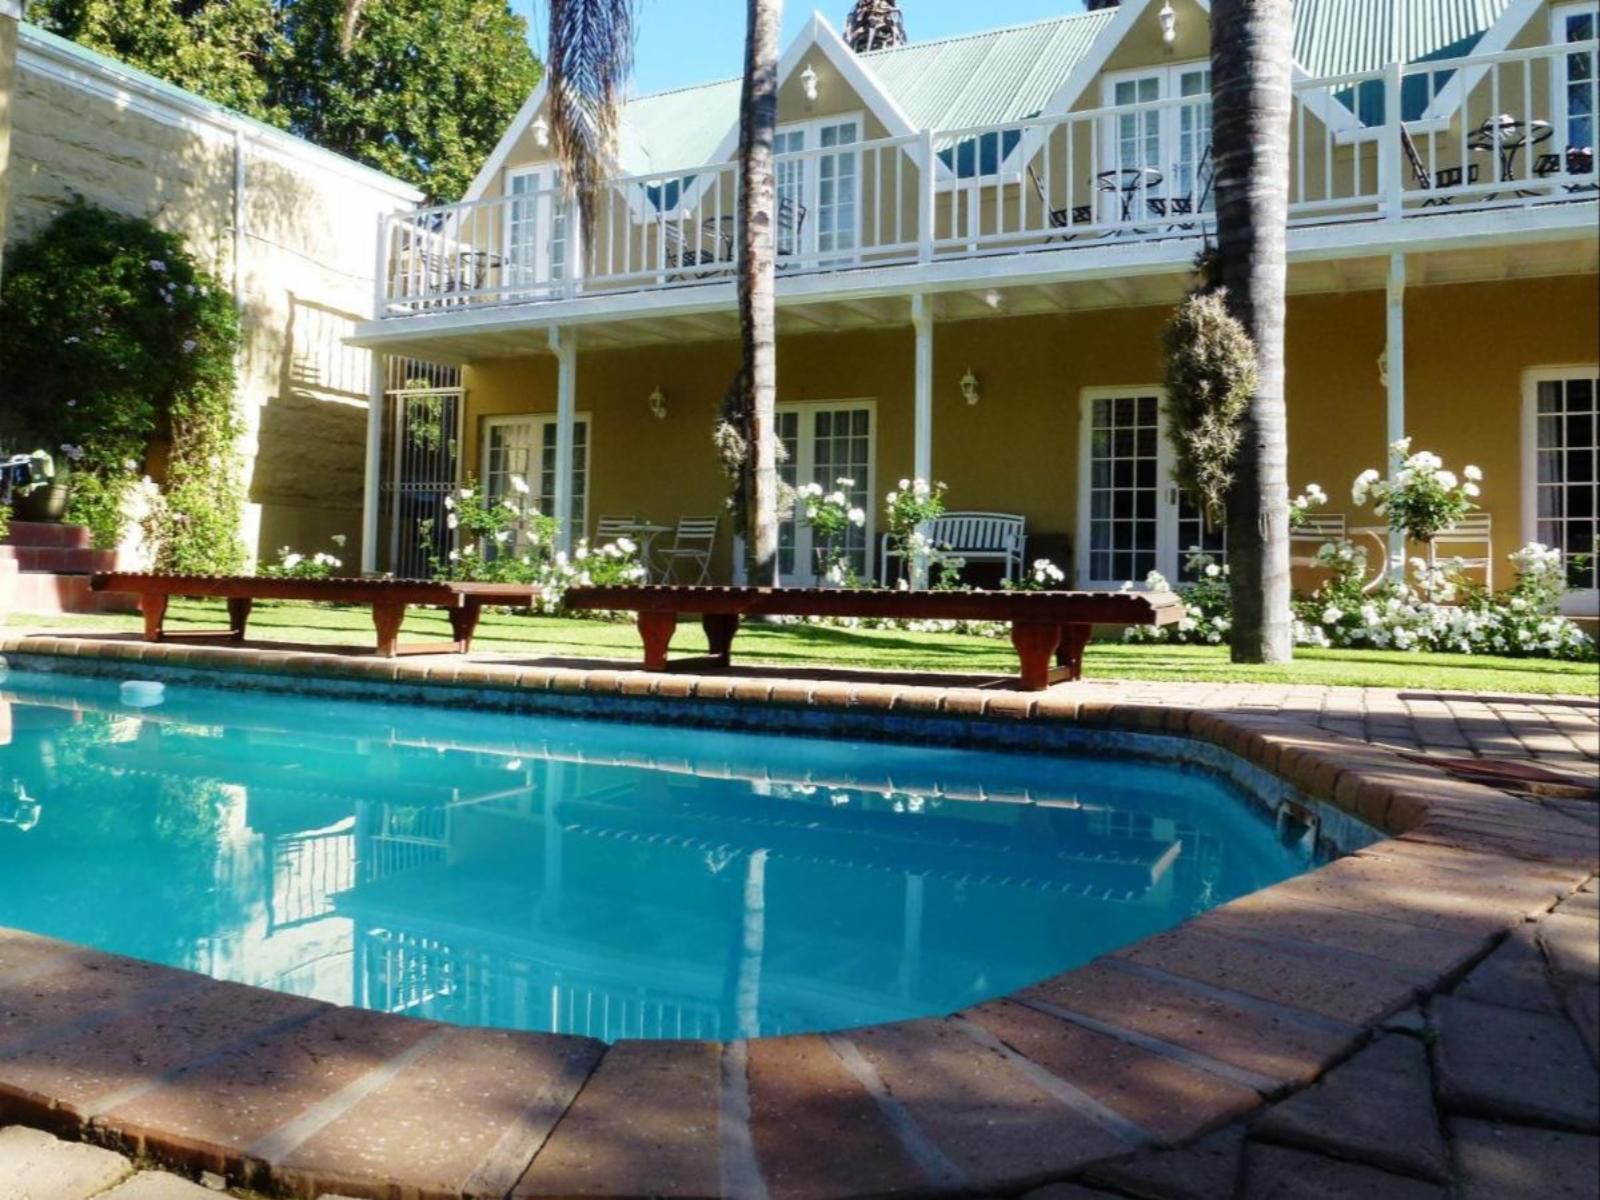 Yamkela Guest House Oudtshoorn Western Cape South Africa Complementary Colors, House, Building, Architecture, Swimming Pool